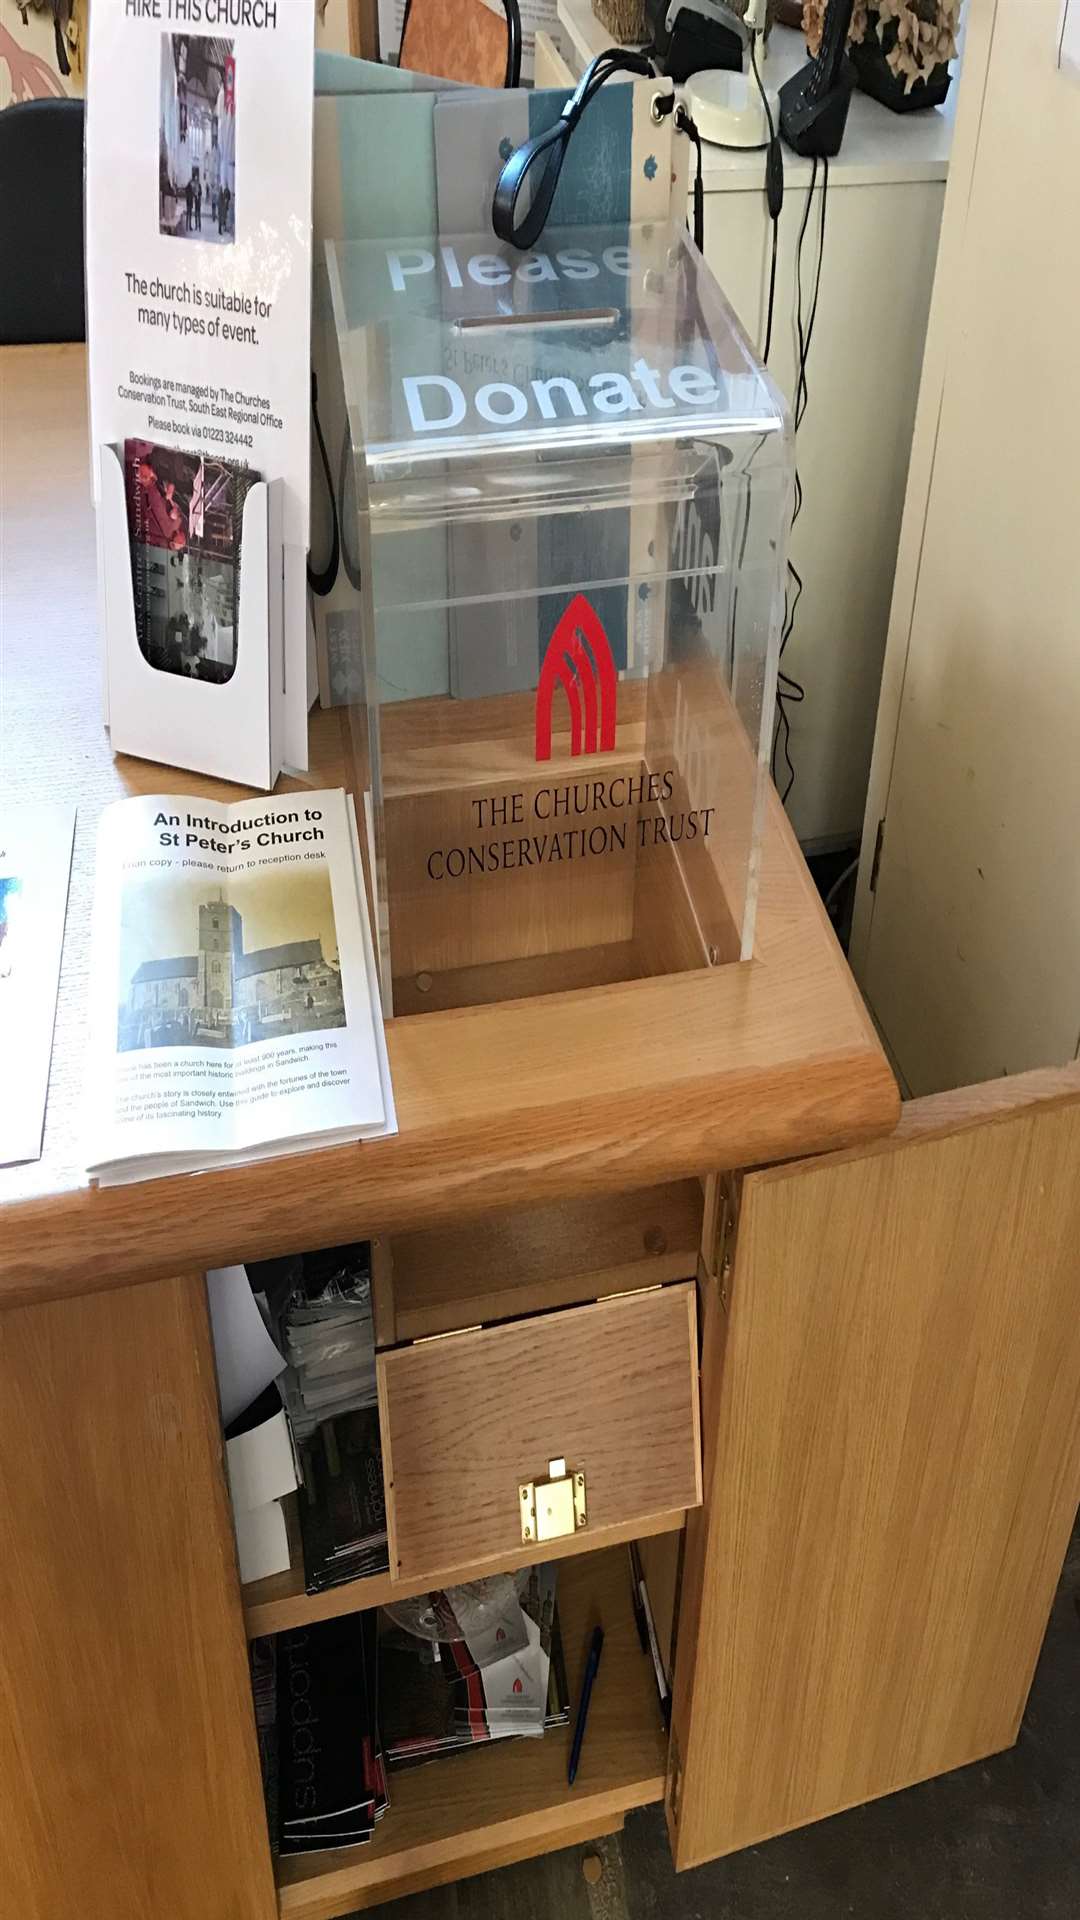 Small change from the donations box was taken